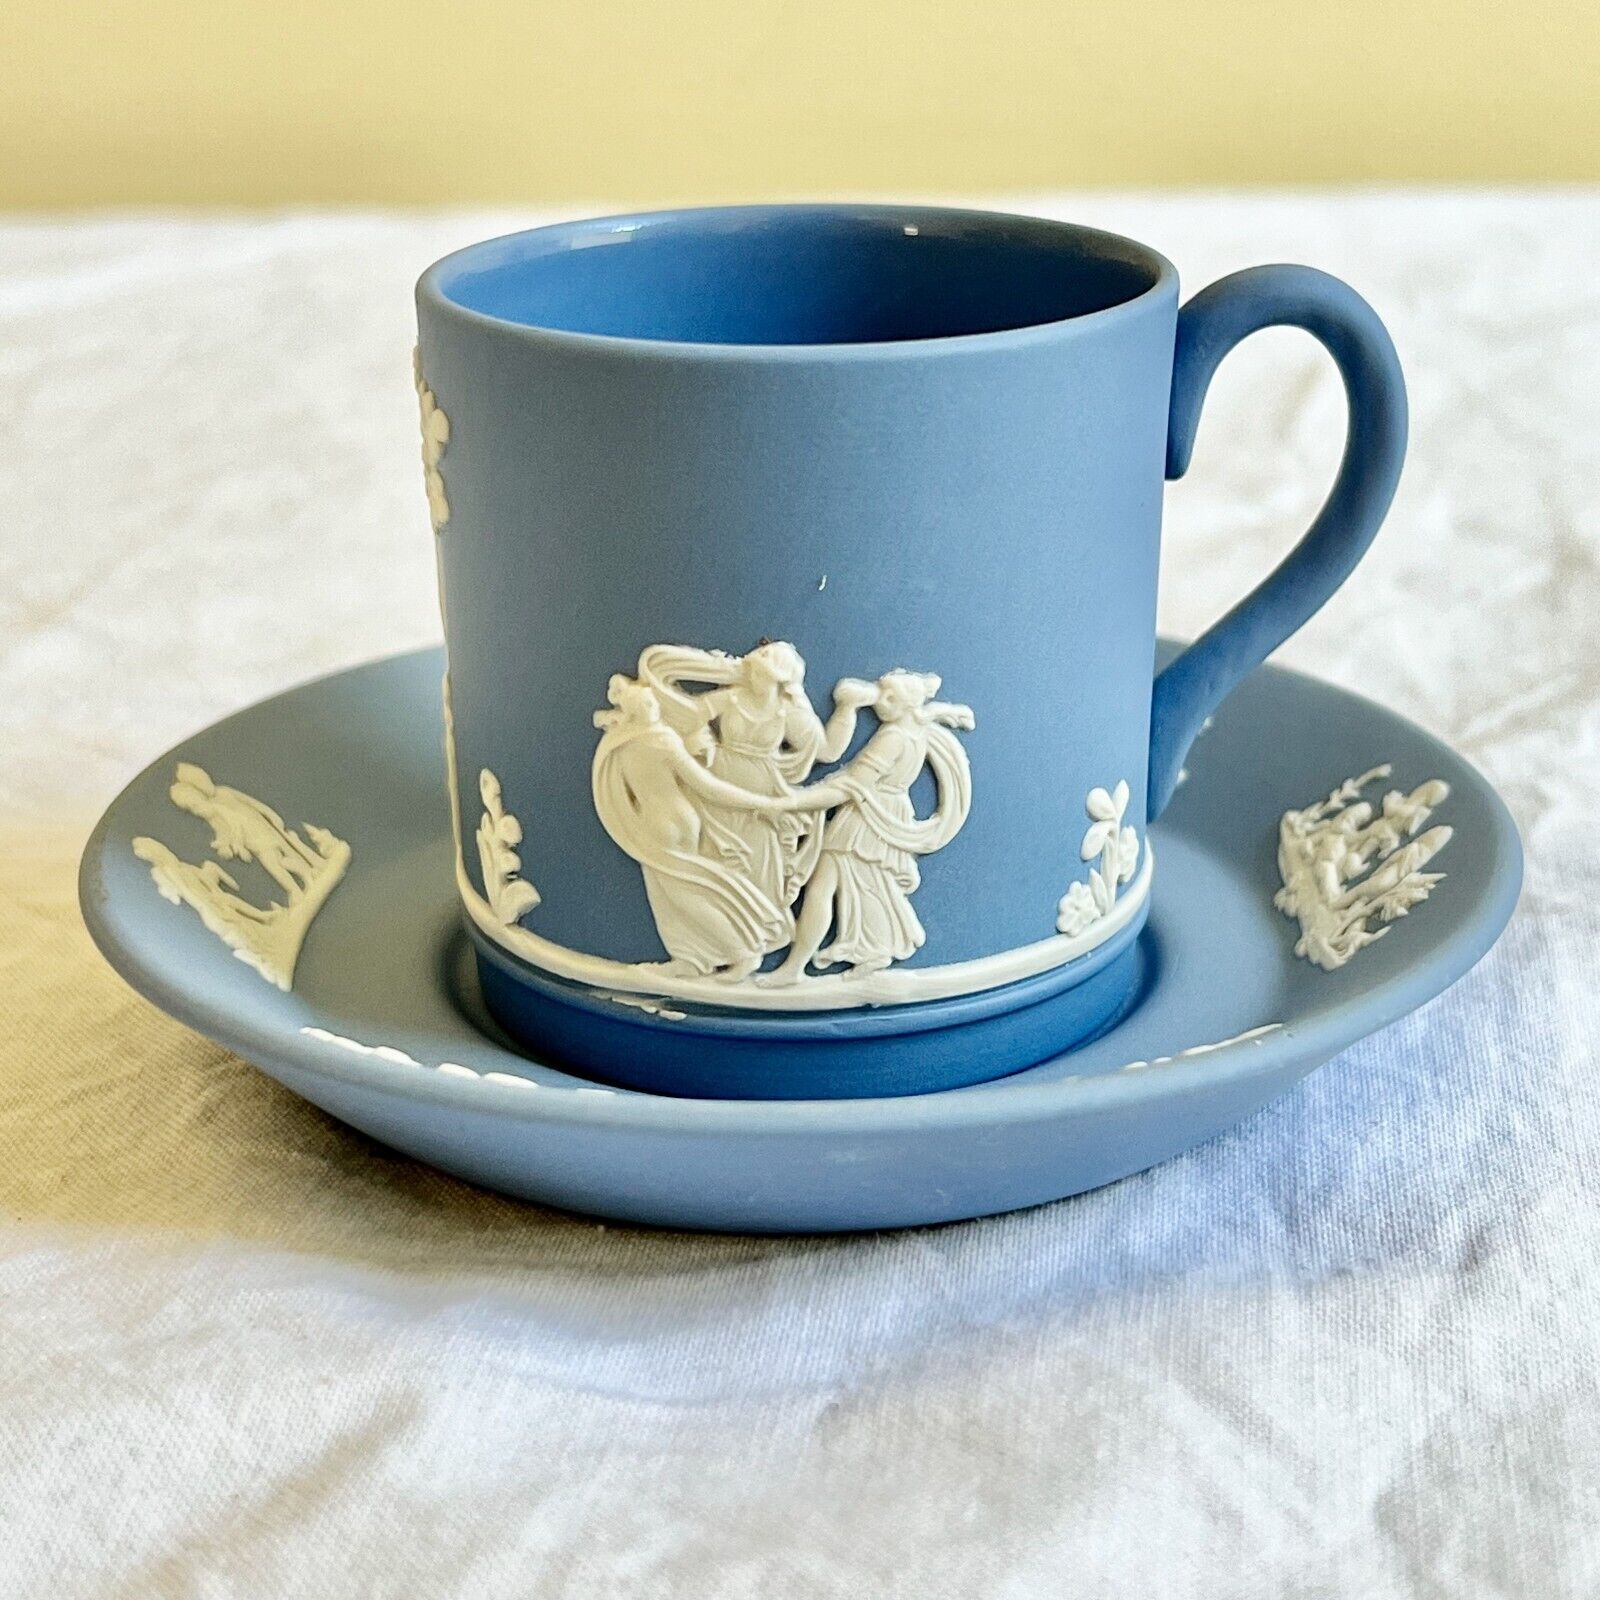 Vintage Wedgwood Jasperware Demitasse Cup and Saucer Made In England Excellent B